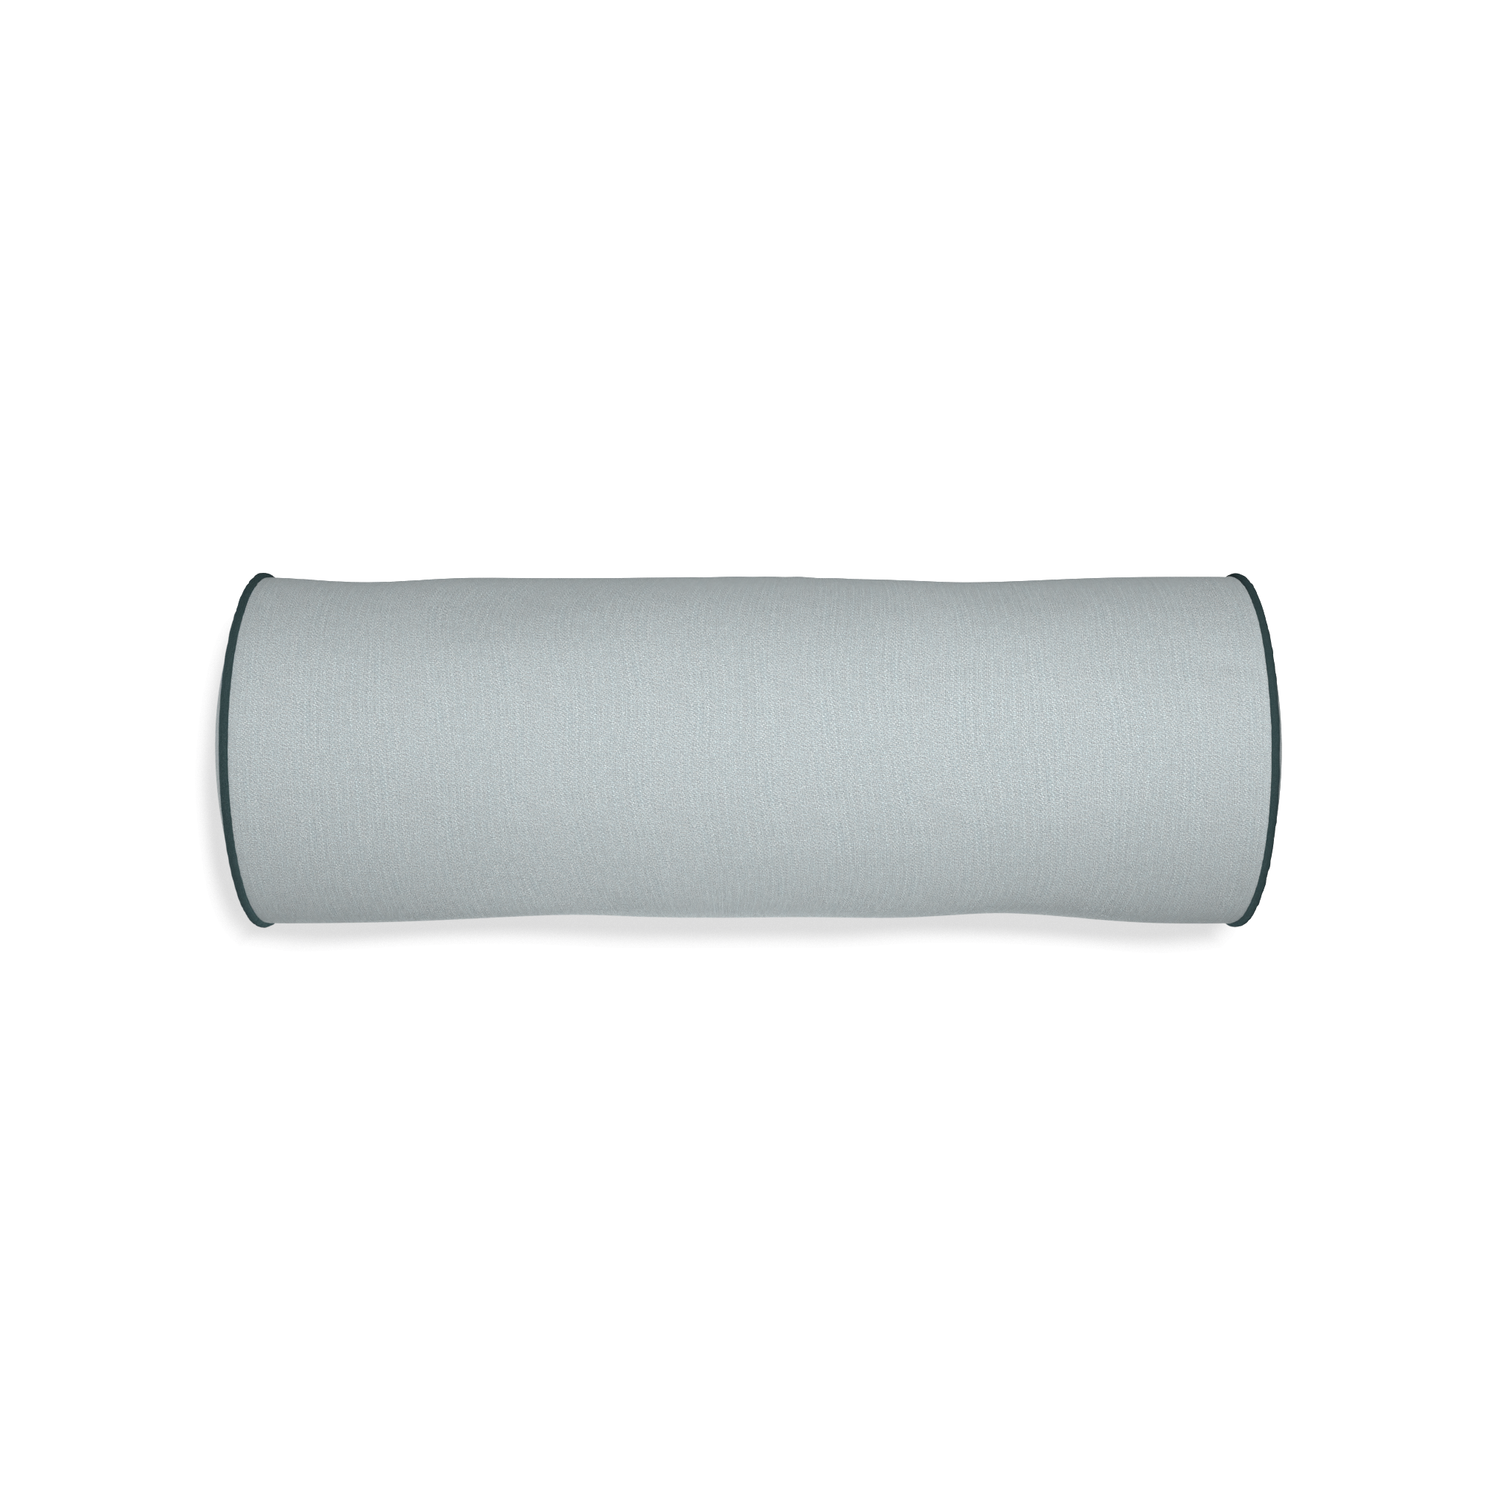 Bolster sea custom grey bluepillow with p piping on white background